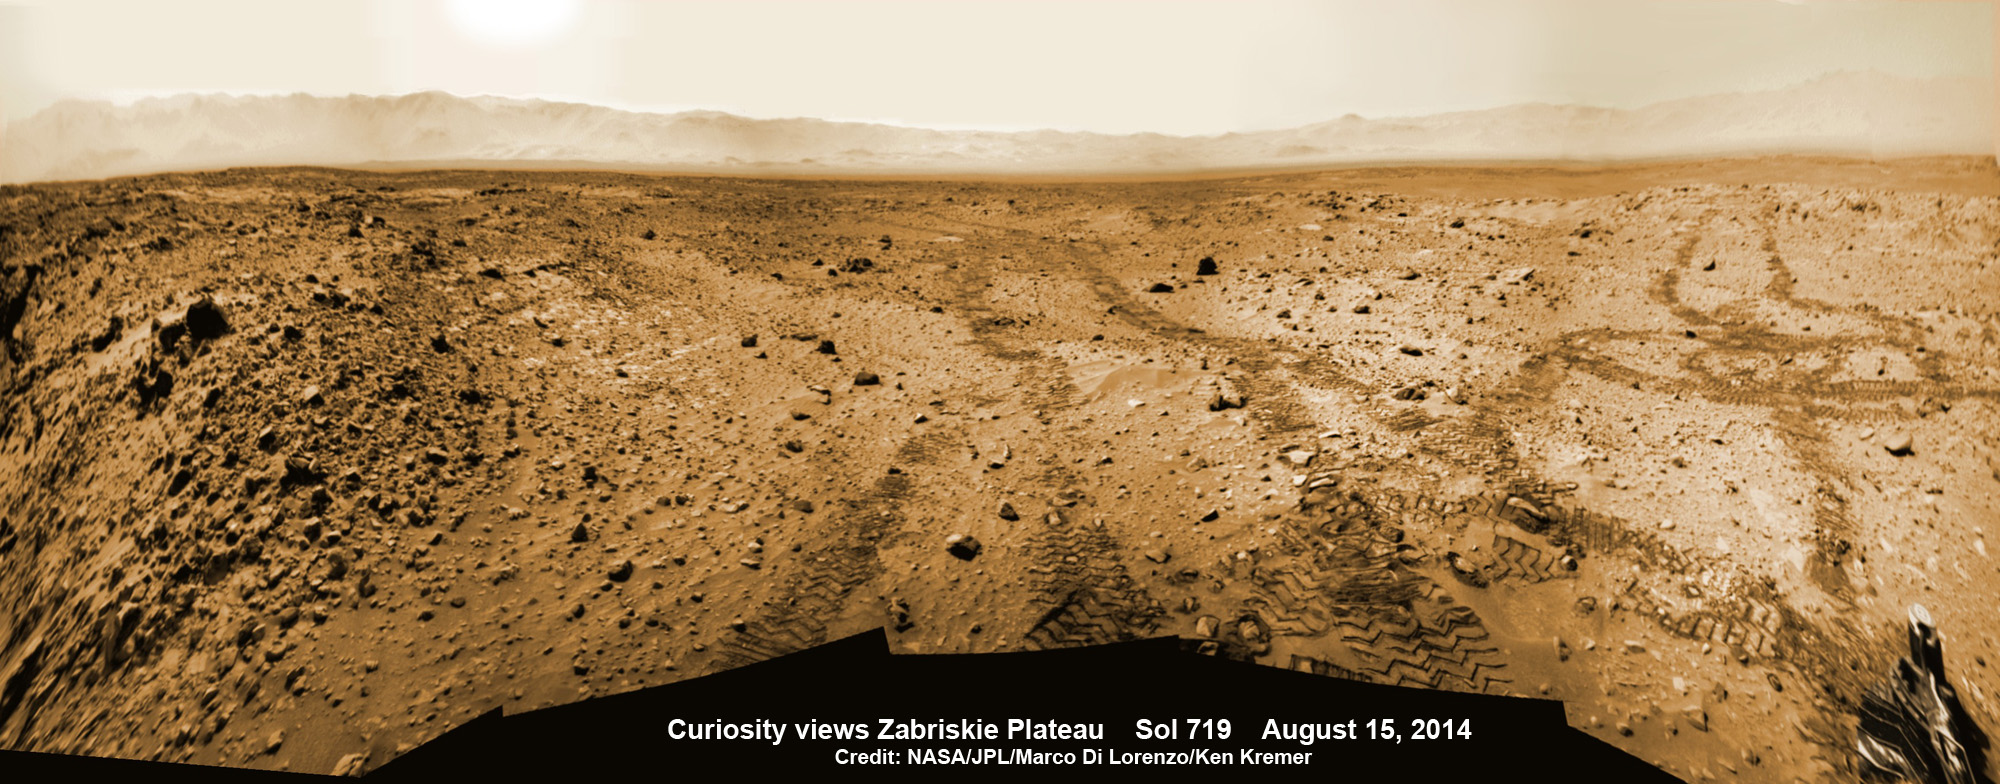 Curiosity rover looks back to the rocky plains of the Zabriskie plateau from sandy ramp into ‘Hidden Valley’ as shown in this photo mosaic view captured on Aug. 14, 2014, Sol 719.  Sharp edged rocks at Zabriskie ripped new holes into rover wheels.   Navcam camera raw images stitched and colorized.  Credit: NASA/JPL-Caltech/Marco Di Lorenzo/Ken Kremer-kenkremer.com